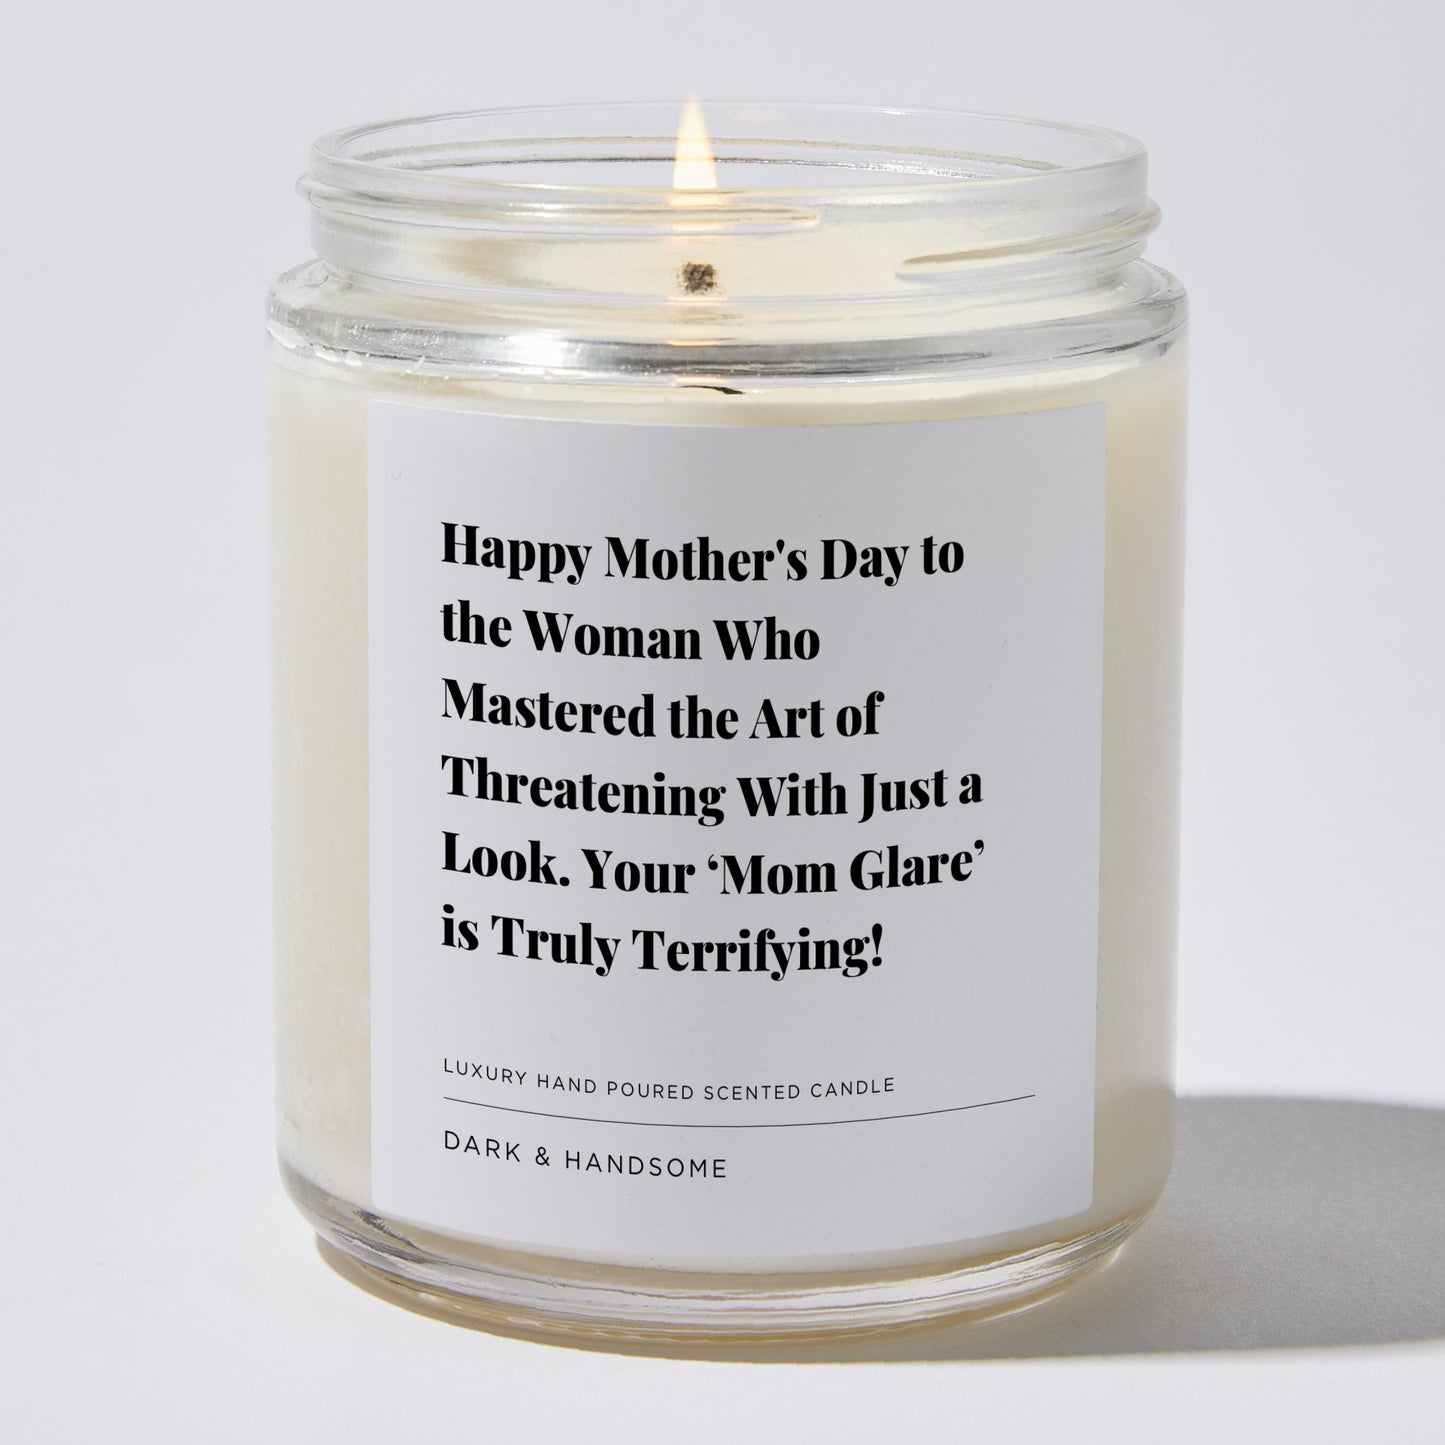 Gift for Mom - Happy Mother's Day to the woman who mastered the art of threatening with just a look. Your 'mom glare' is truly terrifying! - Candle